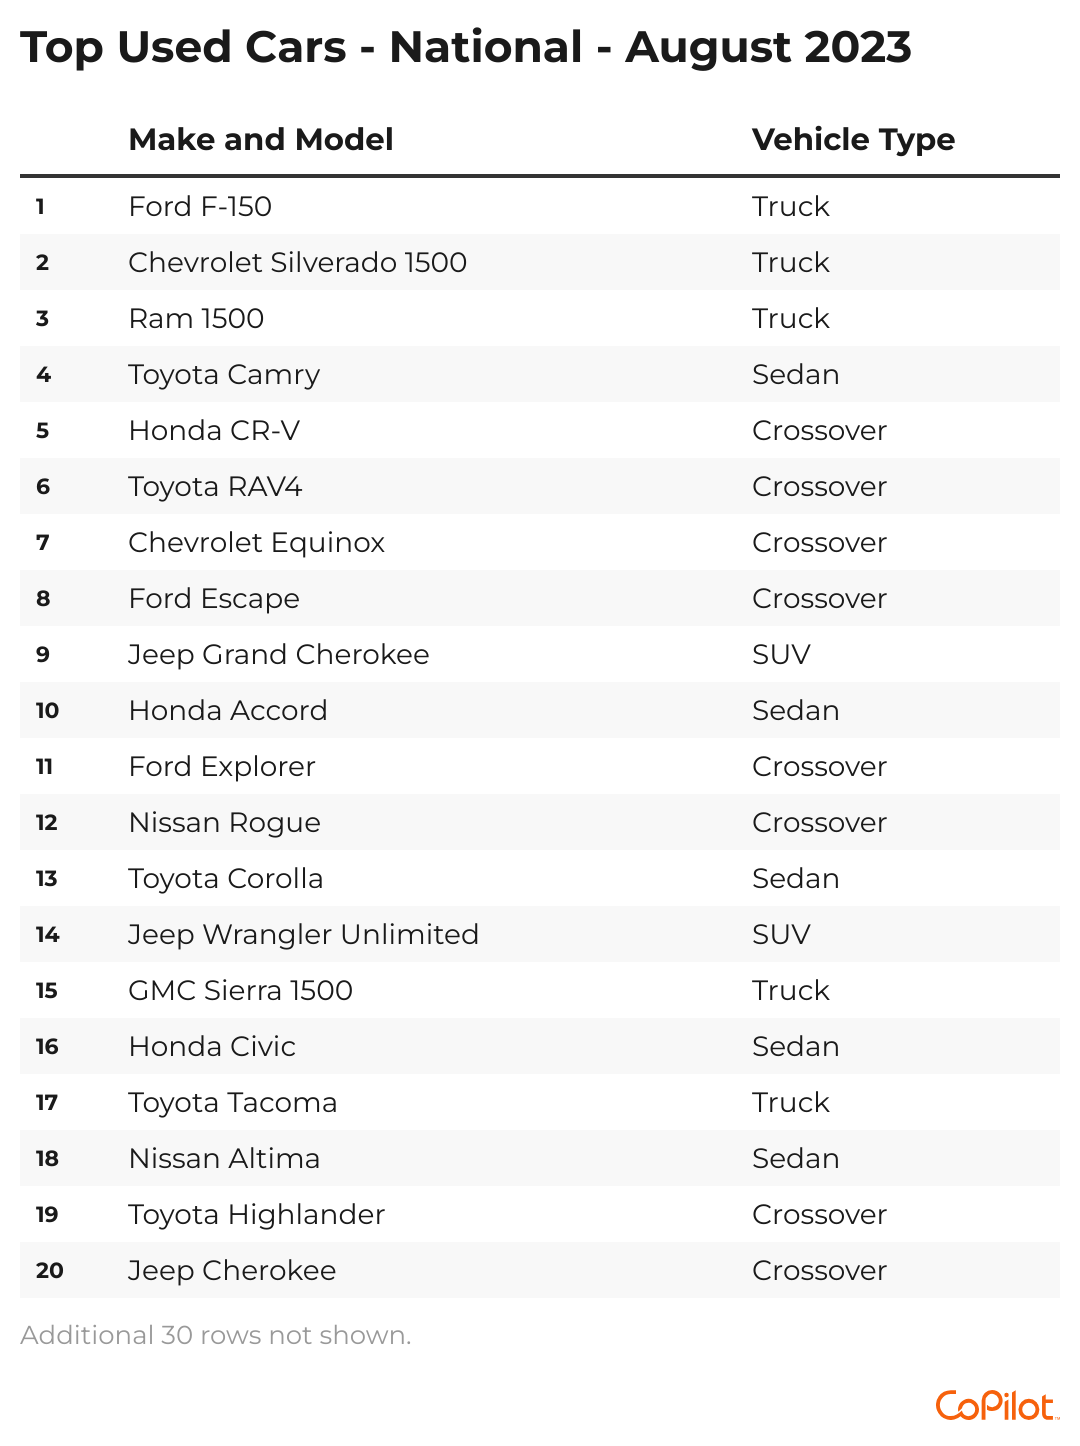 Chart showing the top 20 used cars in the US